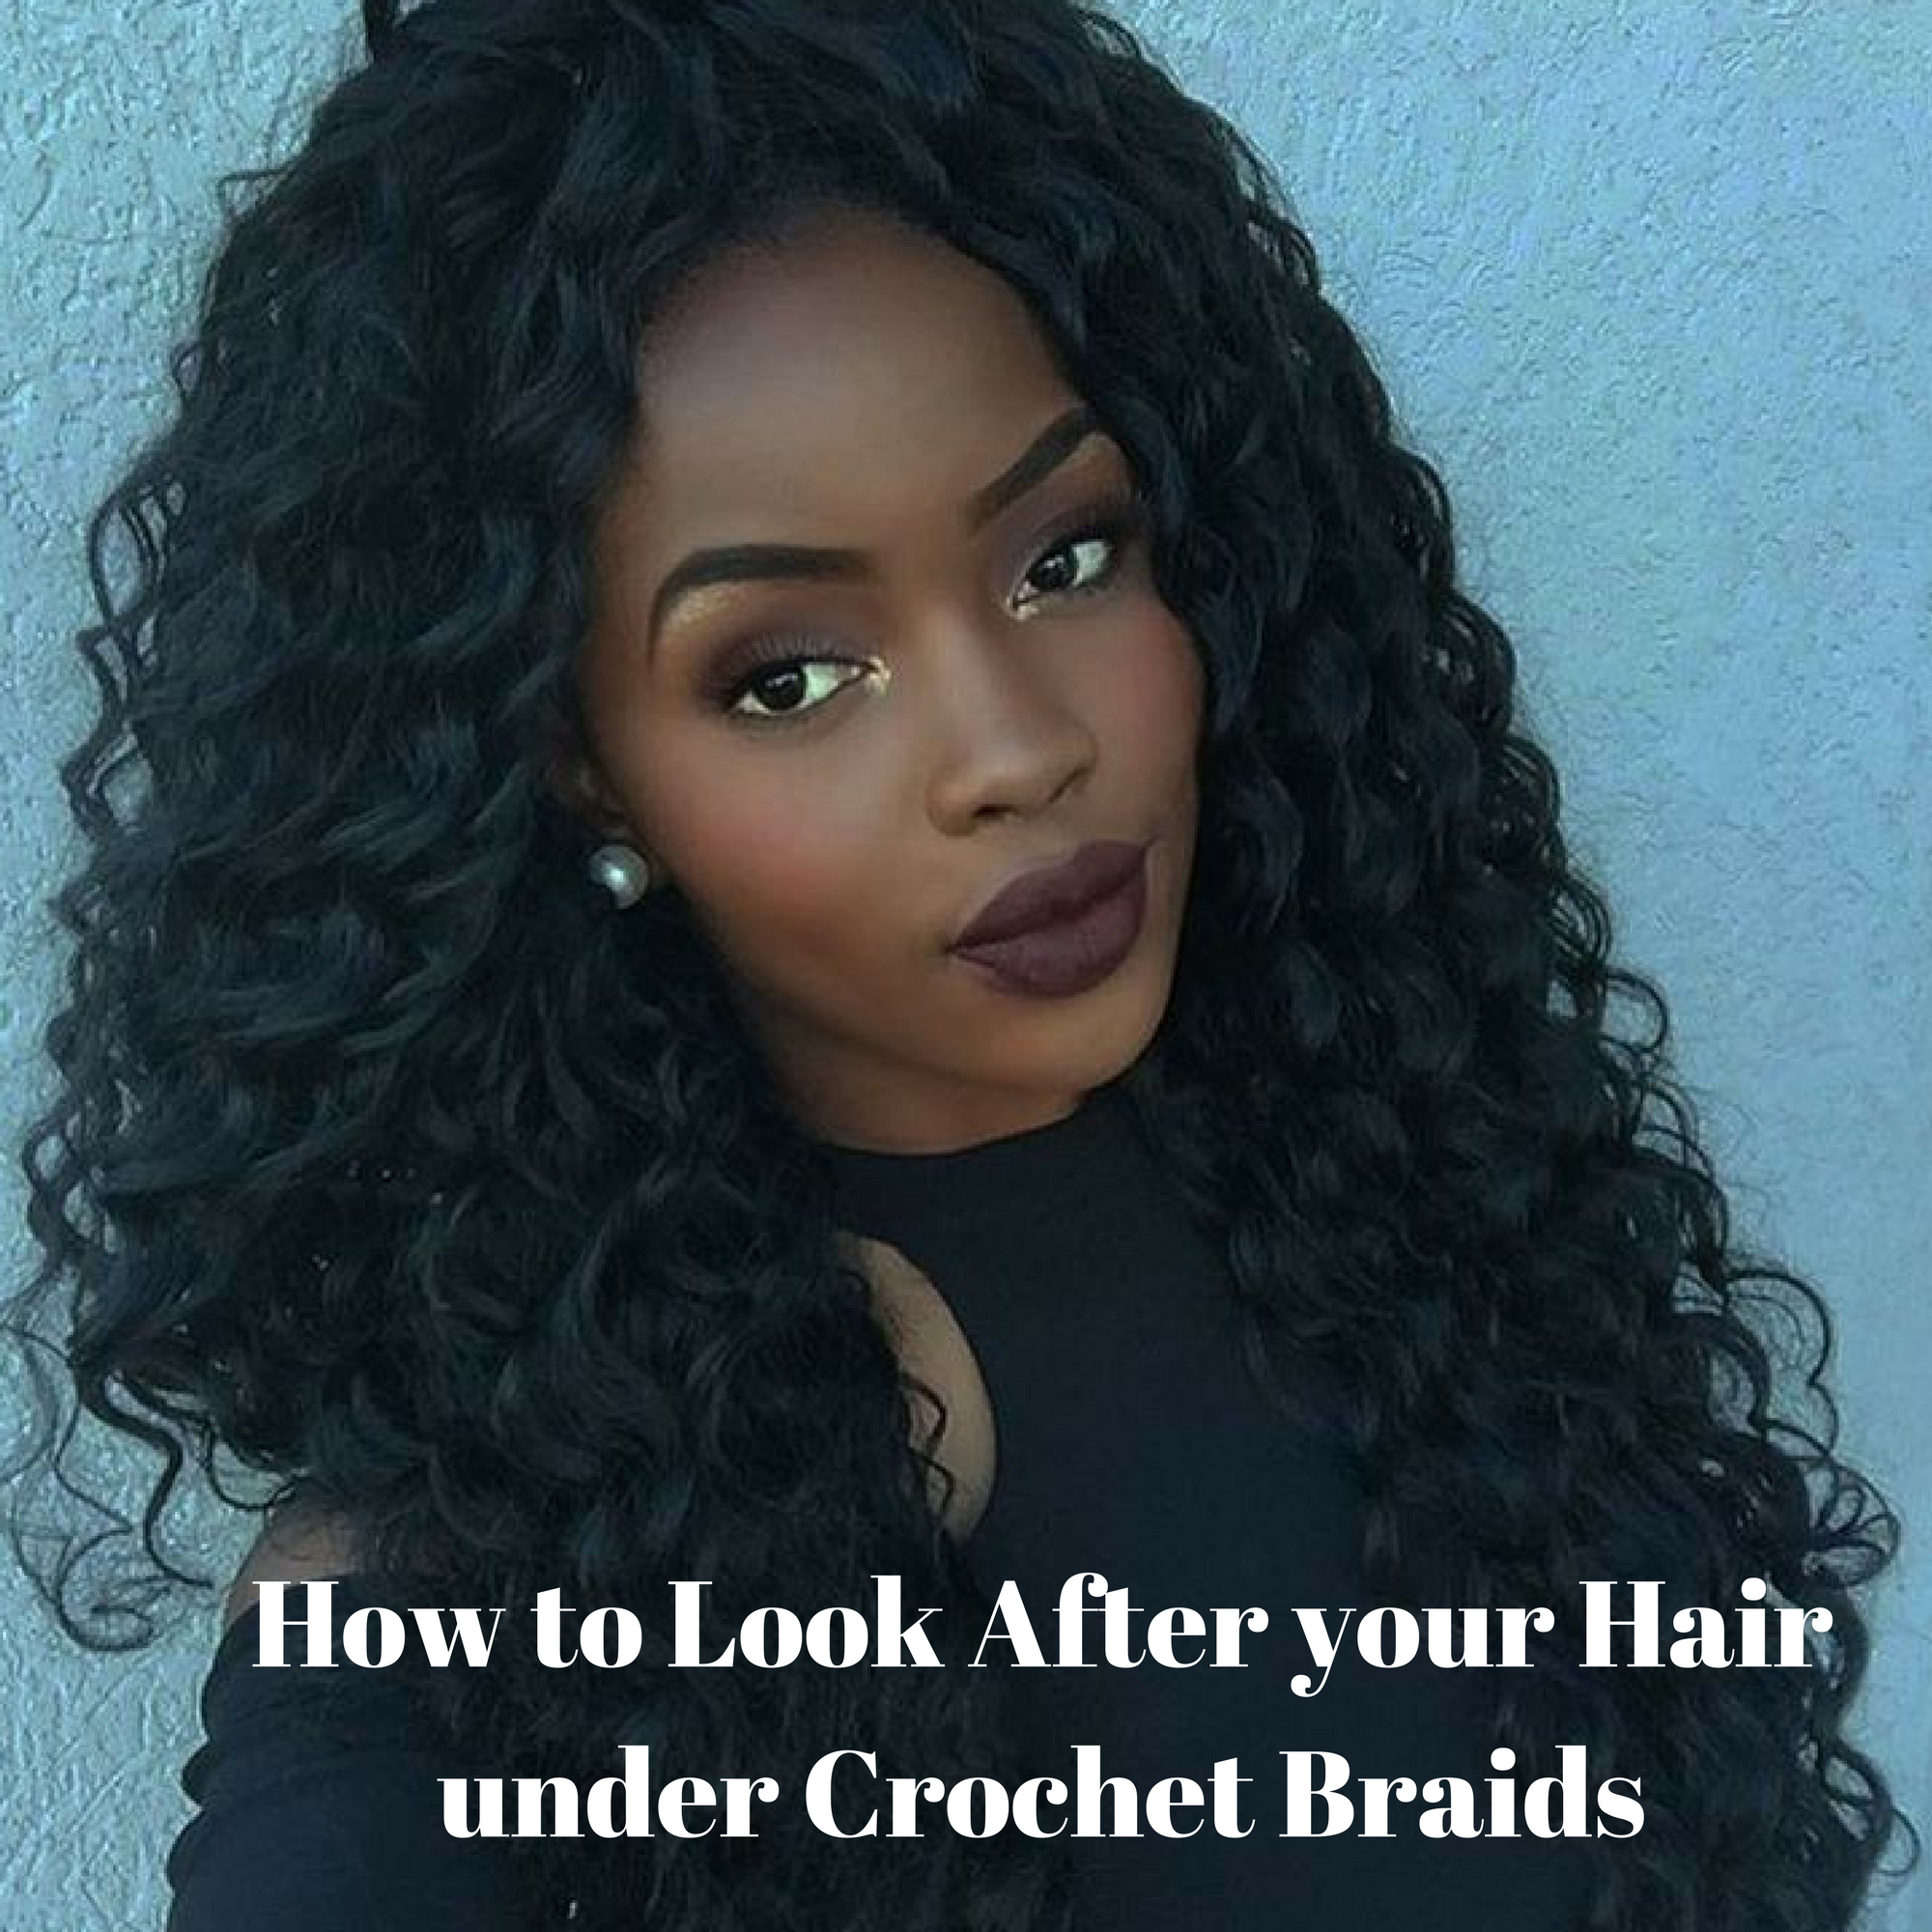 How To Look After Your Hair Under Crochet Braids Beauty Empire